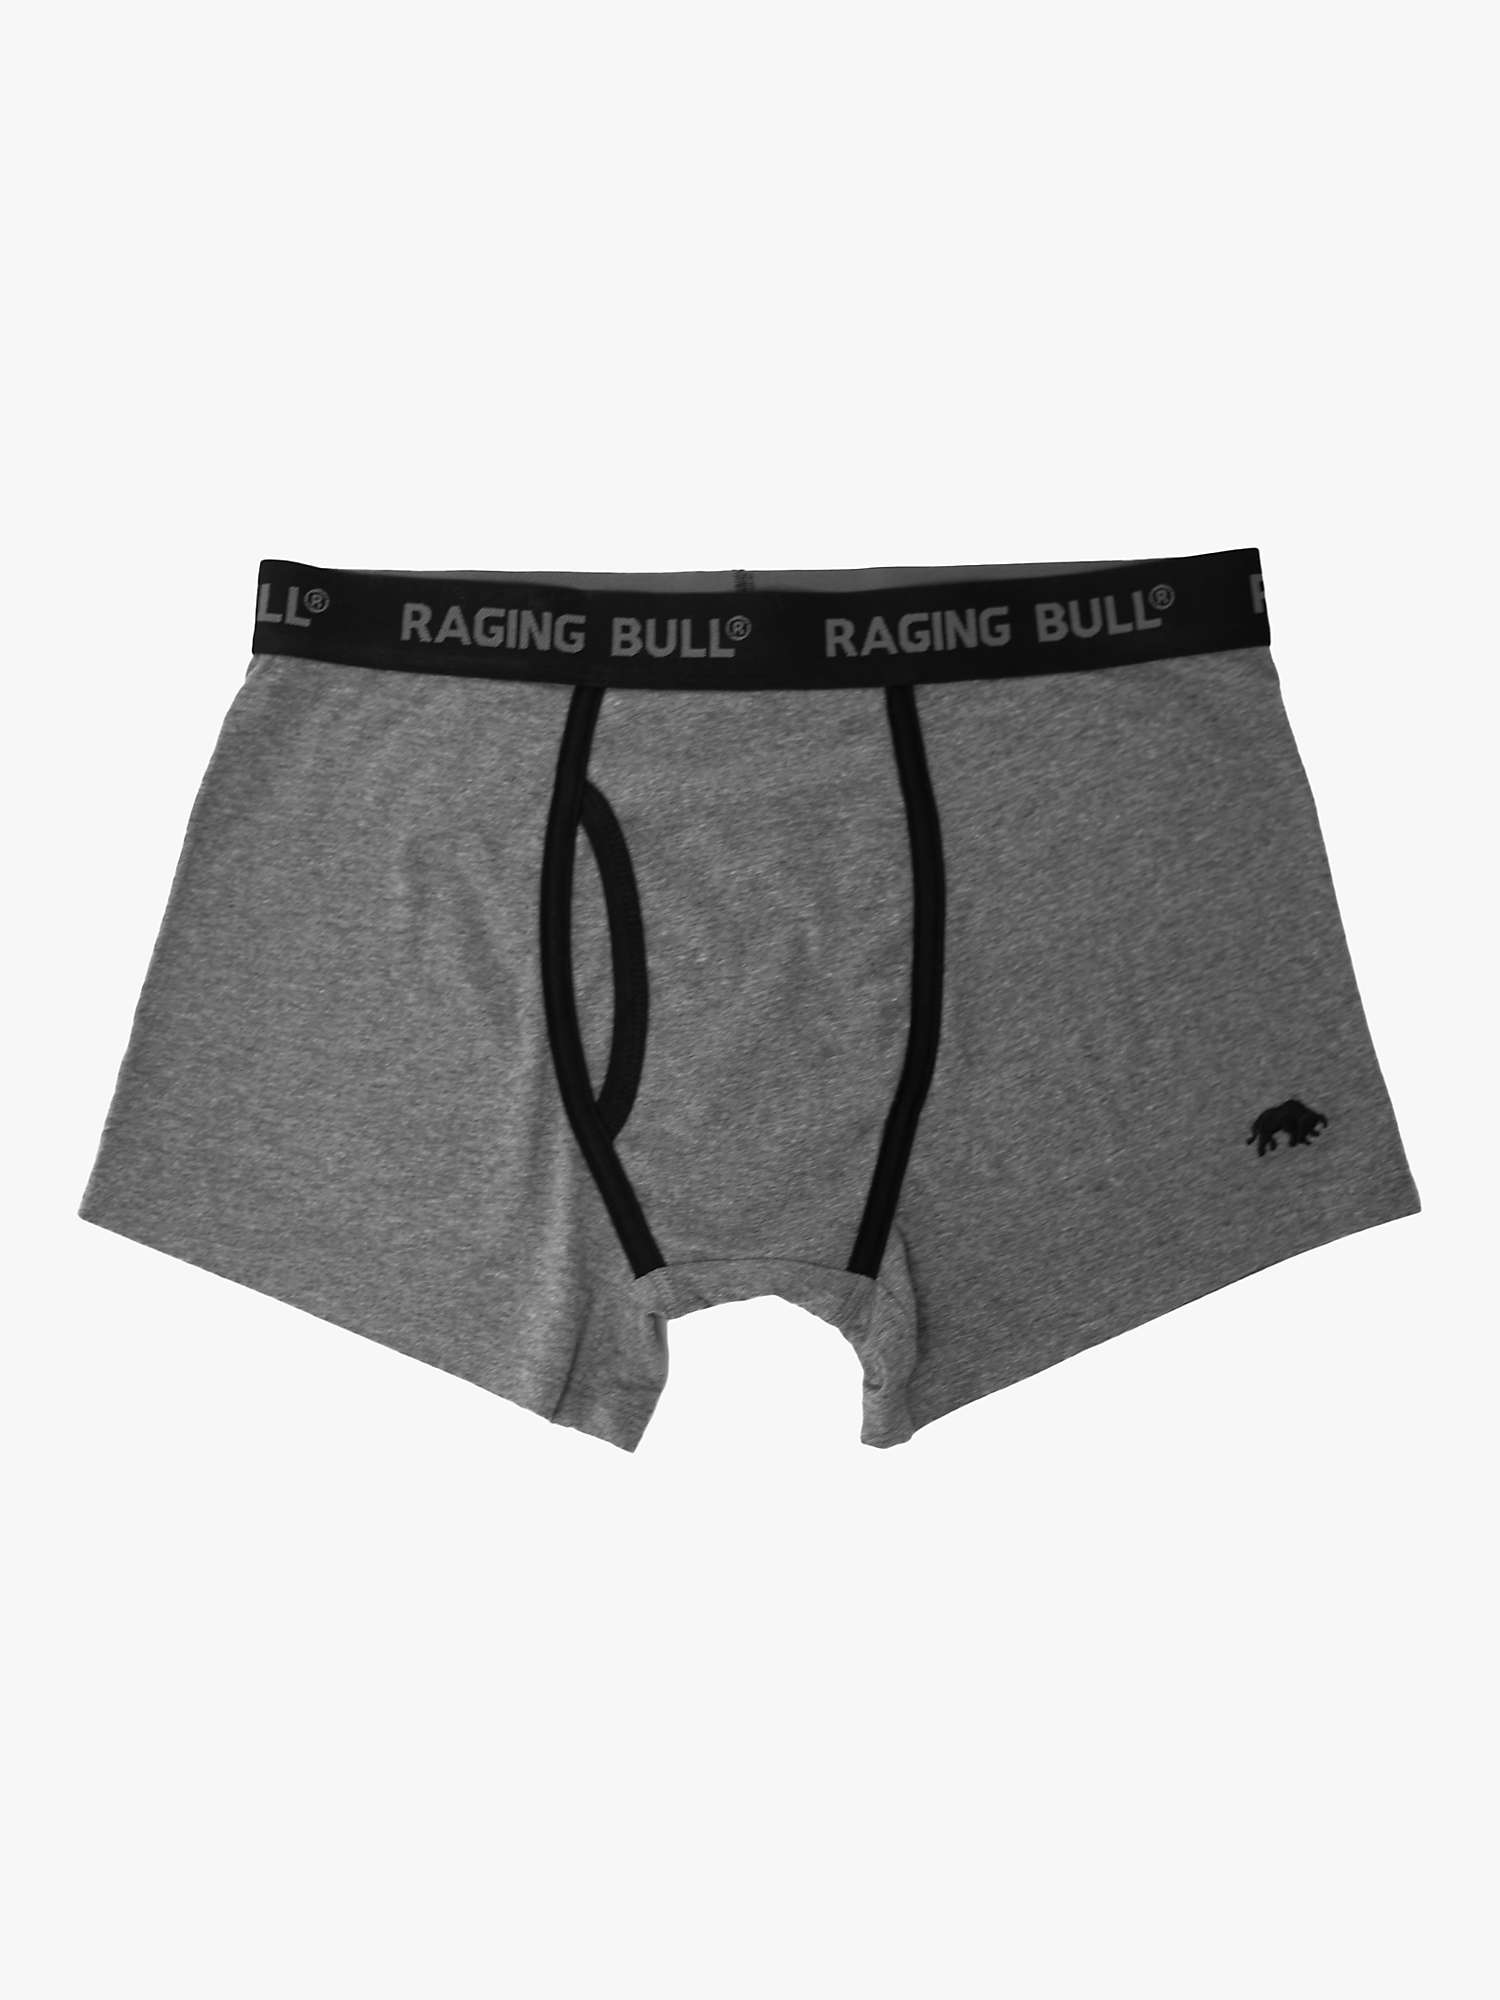 Buy Raging Bull Cotton Stretch Boxers, Pack of 3, Black Online at johnlewis.com